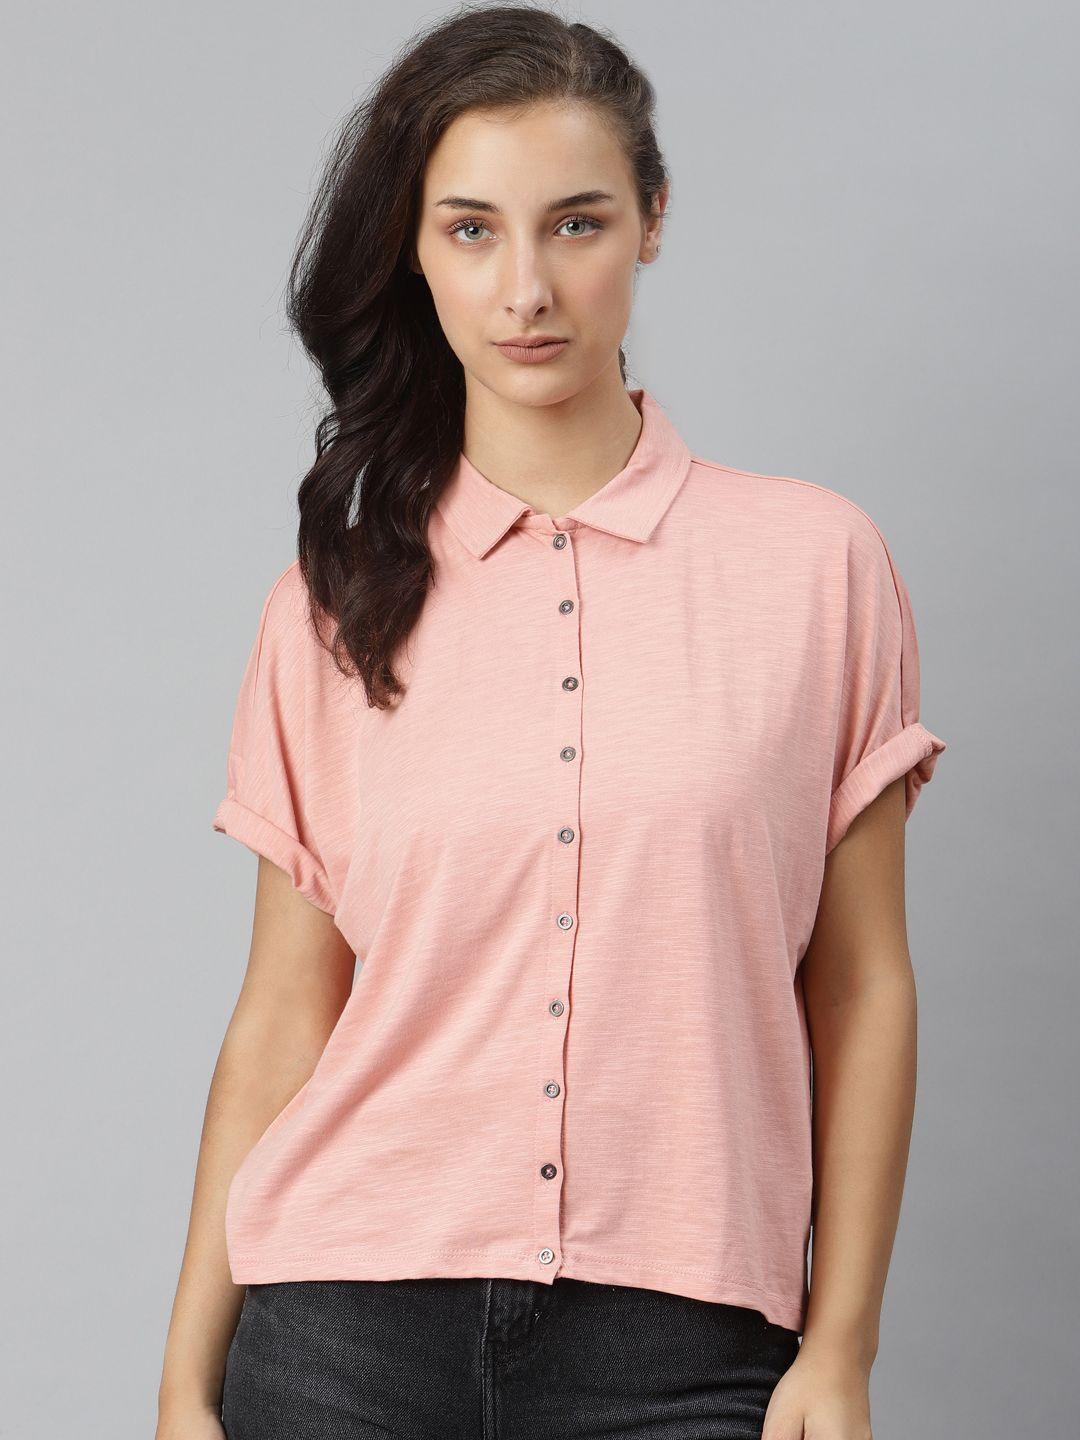 the roadster lifestyle co women peach-coloured stretchable regular fit solid casual shirt